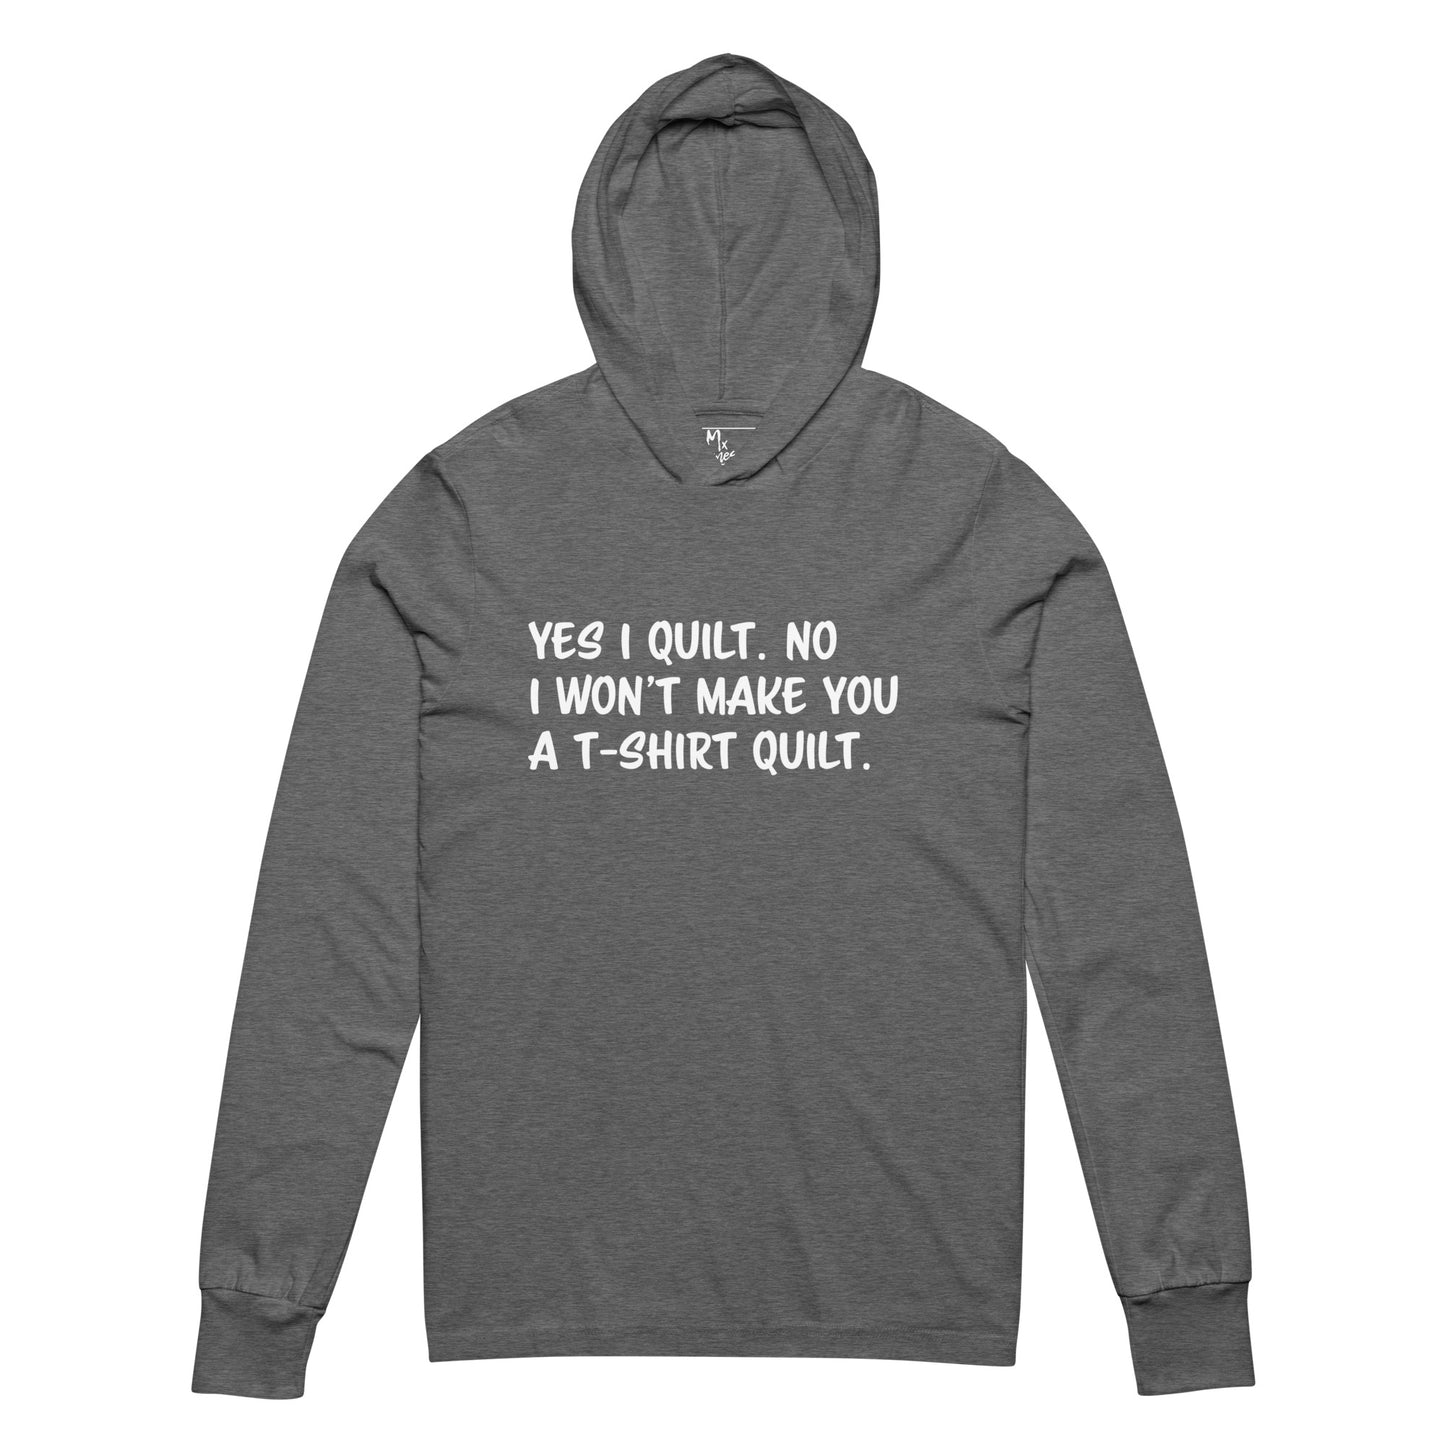 Yes I Quilt. No I Won't Make You a T-Shirt Quilt. Hooded long-sleeve tee